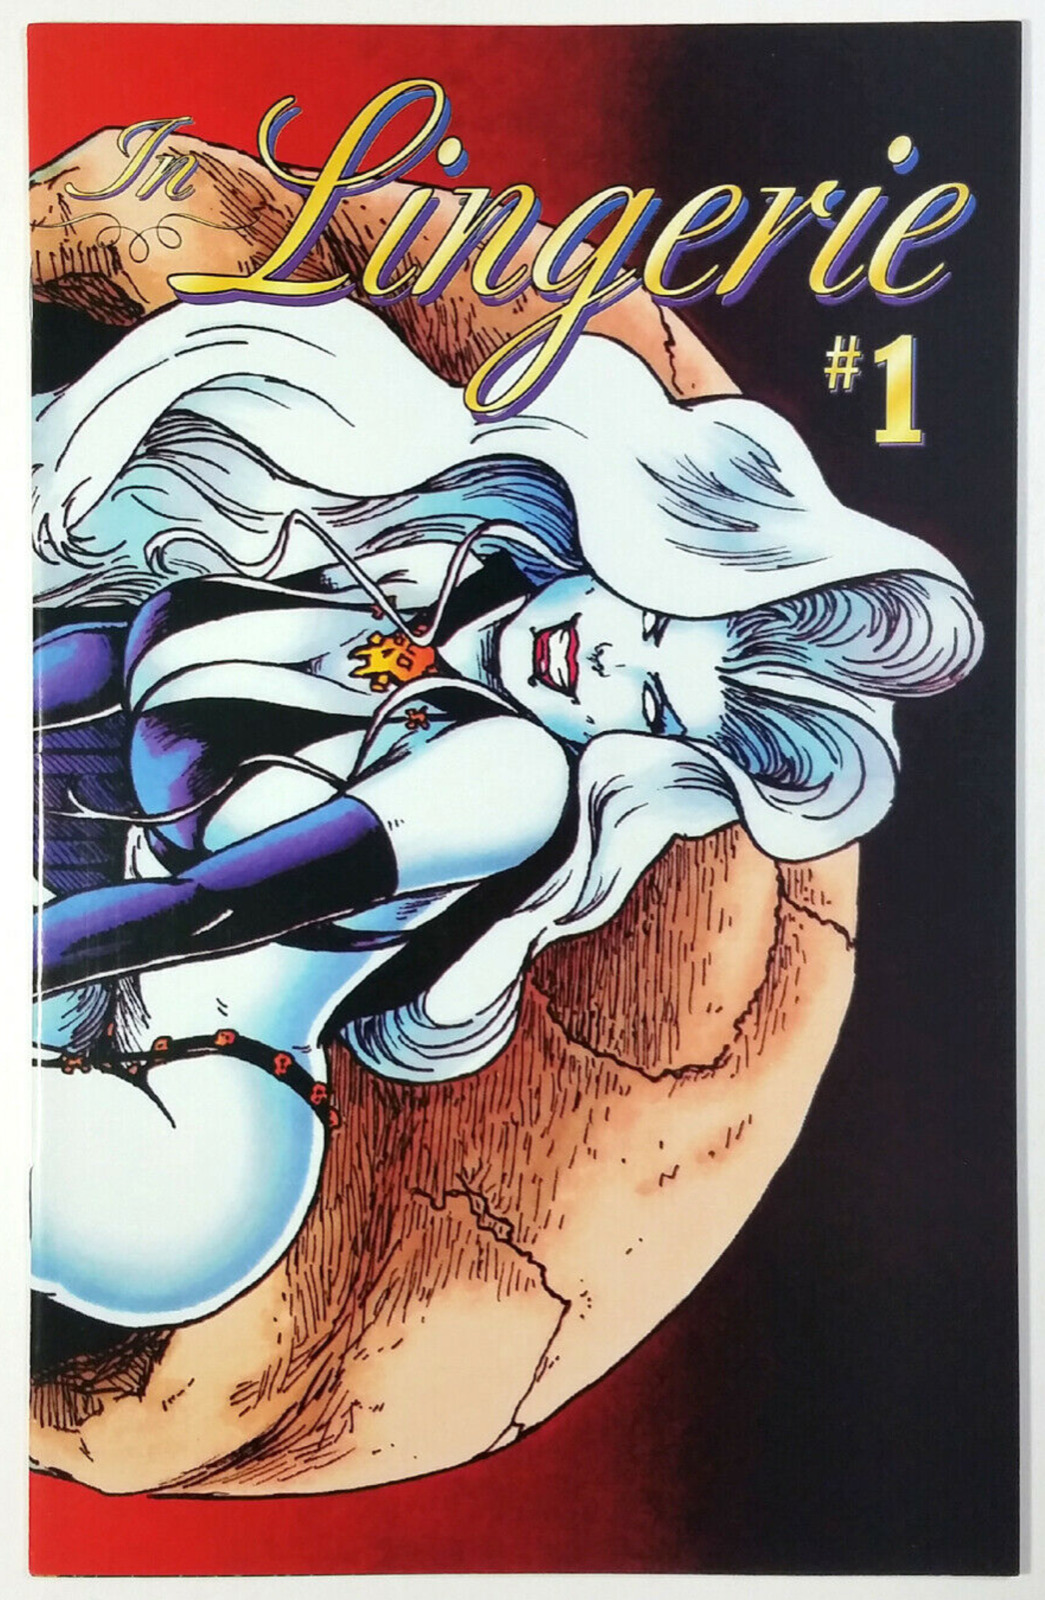 LADY DEATH IN LINGERIE #1 (1995) CHAOS COMICS AMAZING STEVEN HUGHES WRAP COVER